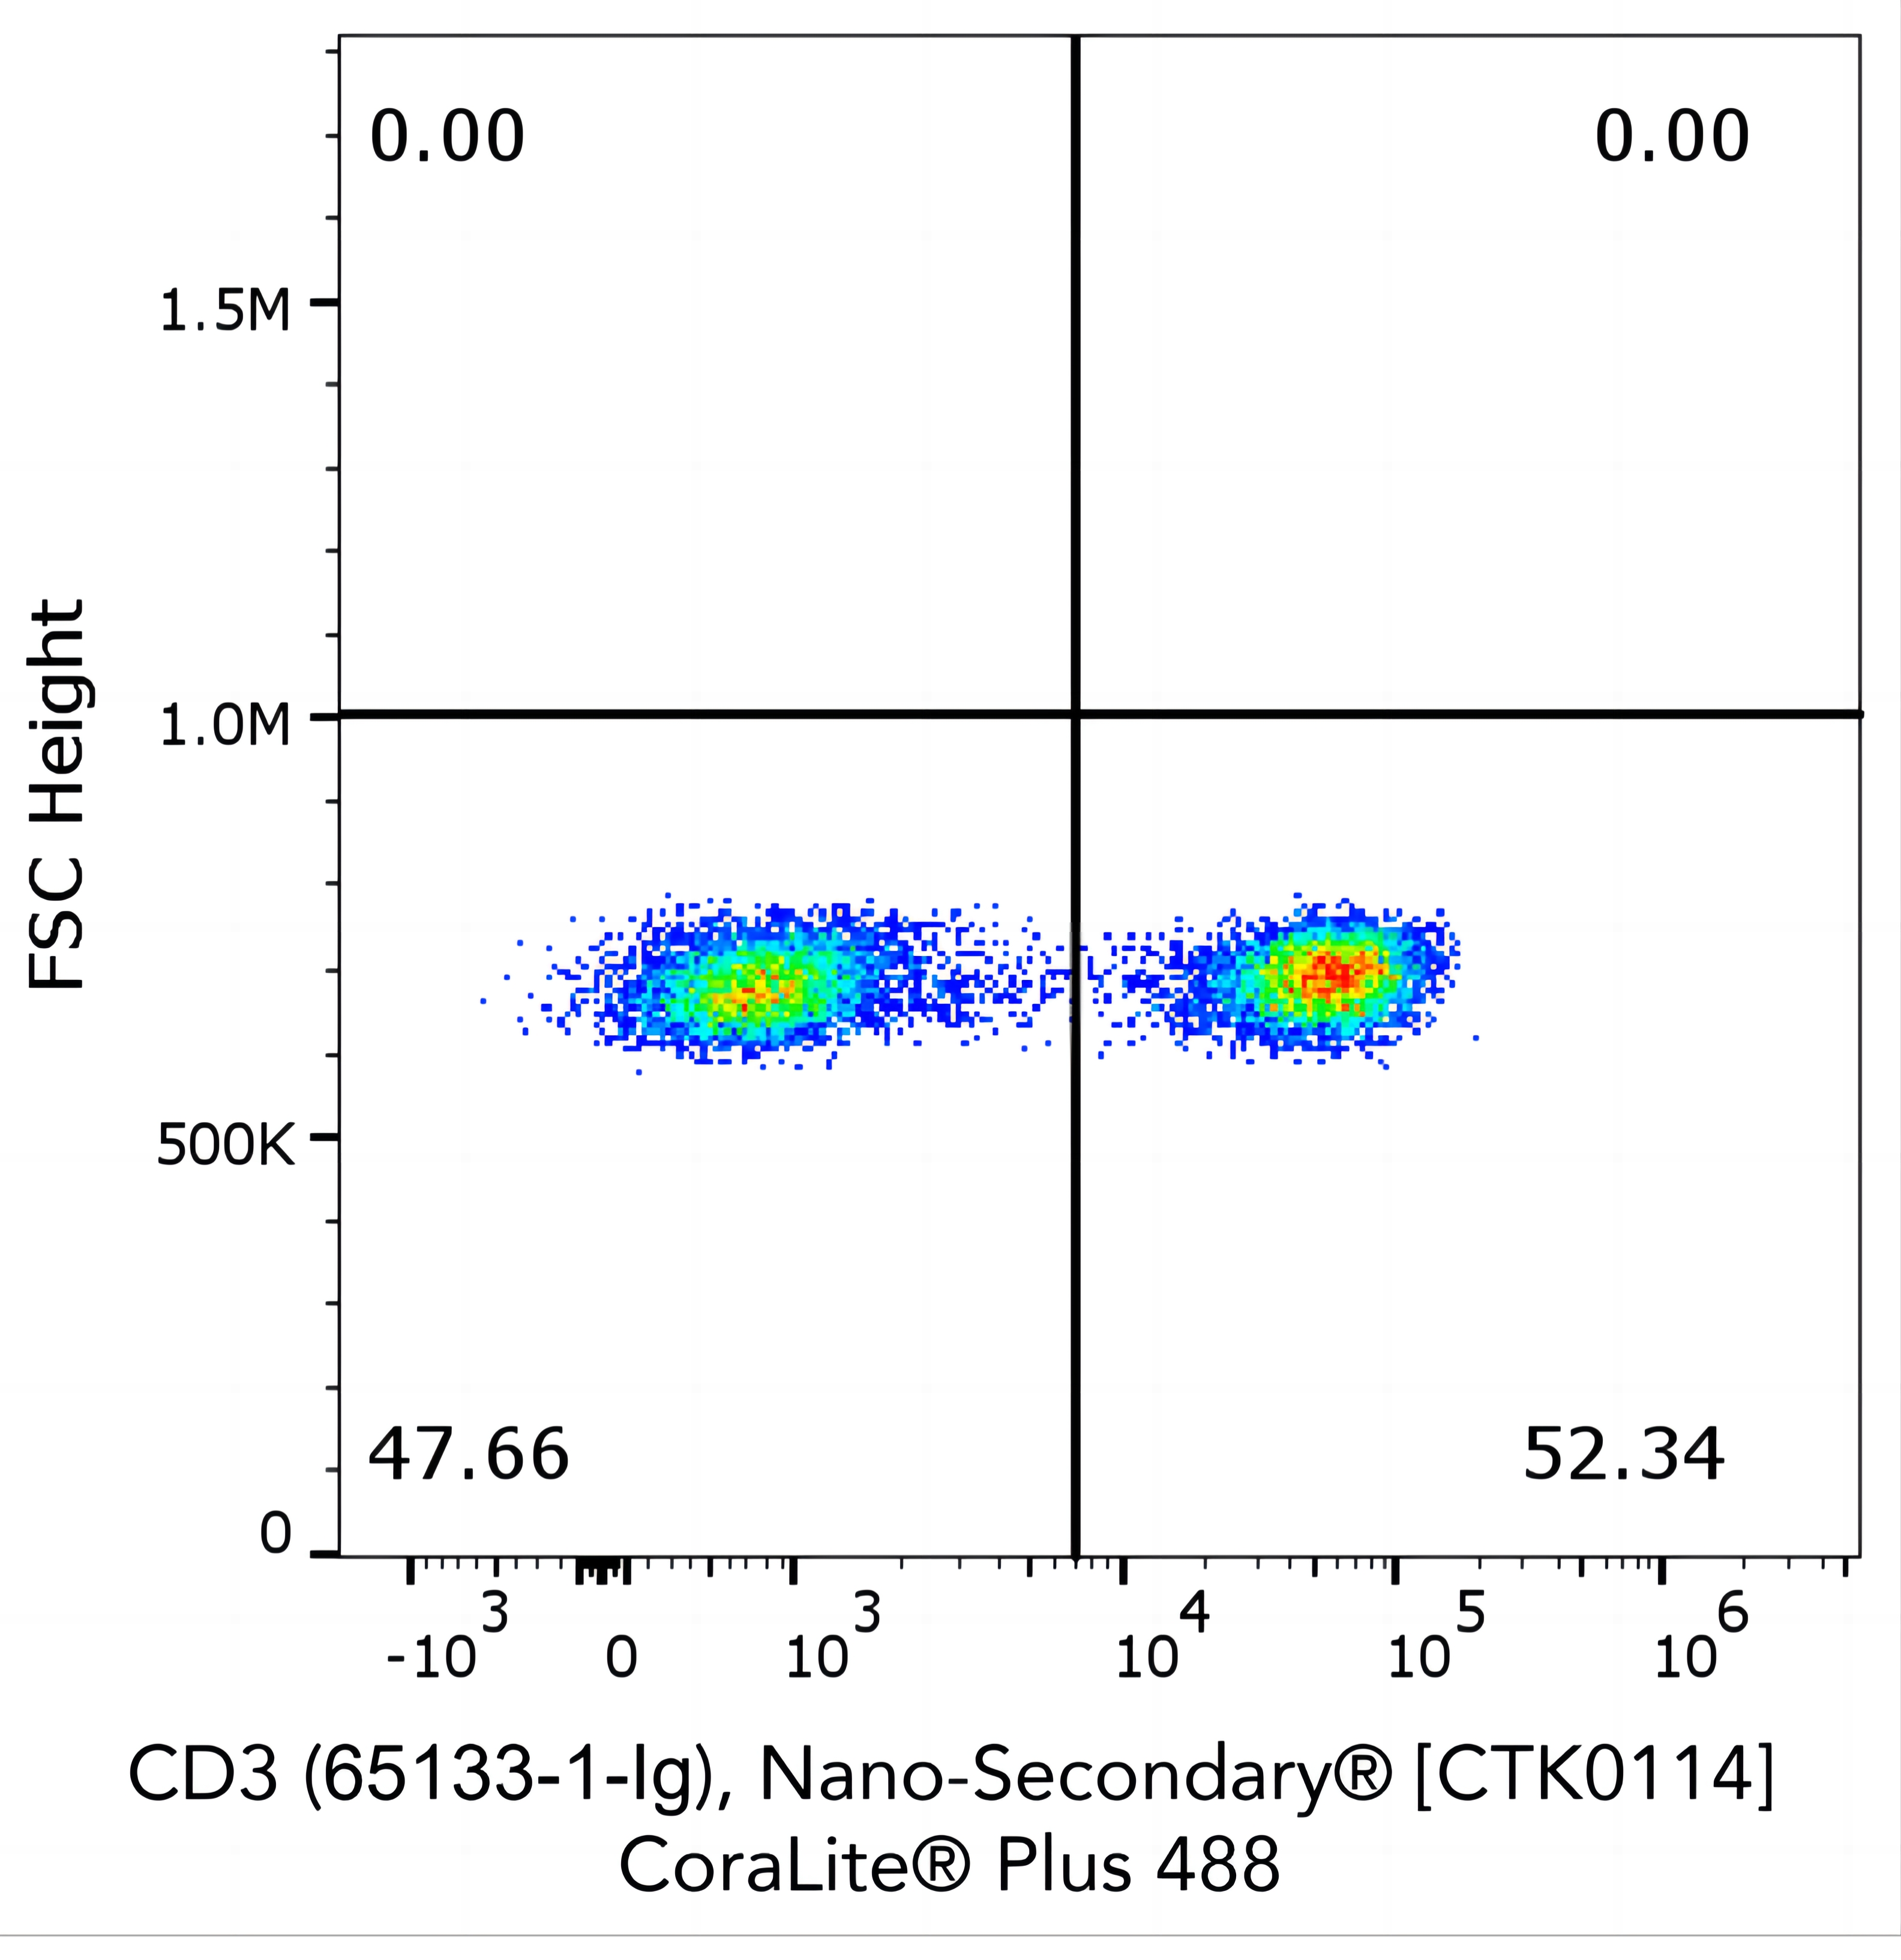 Flow cytometry analysis of 1X10^6 human peripheral blood mononuclear cells (PBMCs) stained with anti-human CD3 (clone OKT3, 65133-1-Ig) and Nano-Secondary® alpaca anti-mouse IgG2a, recombinant VHH, CoraLite® Plus 488.